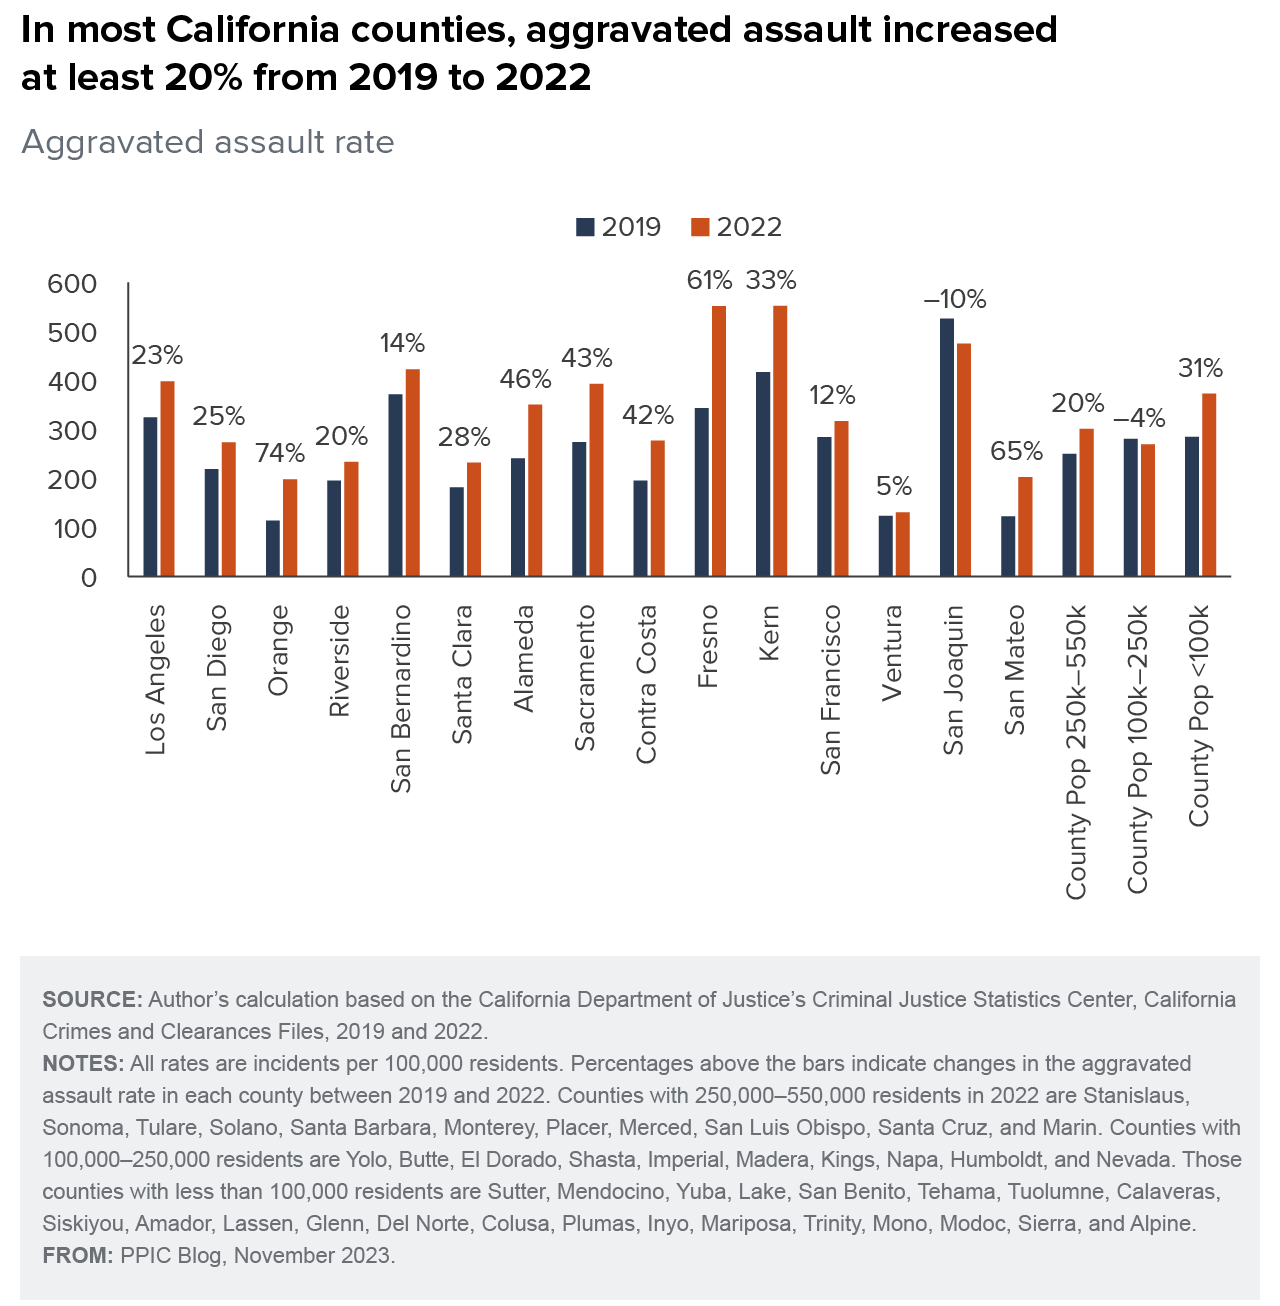 figure - In most California counties, aggravated assault increased at least 20% from 2019 to 2022